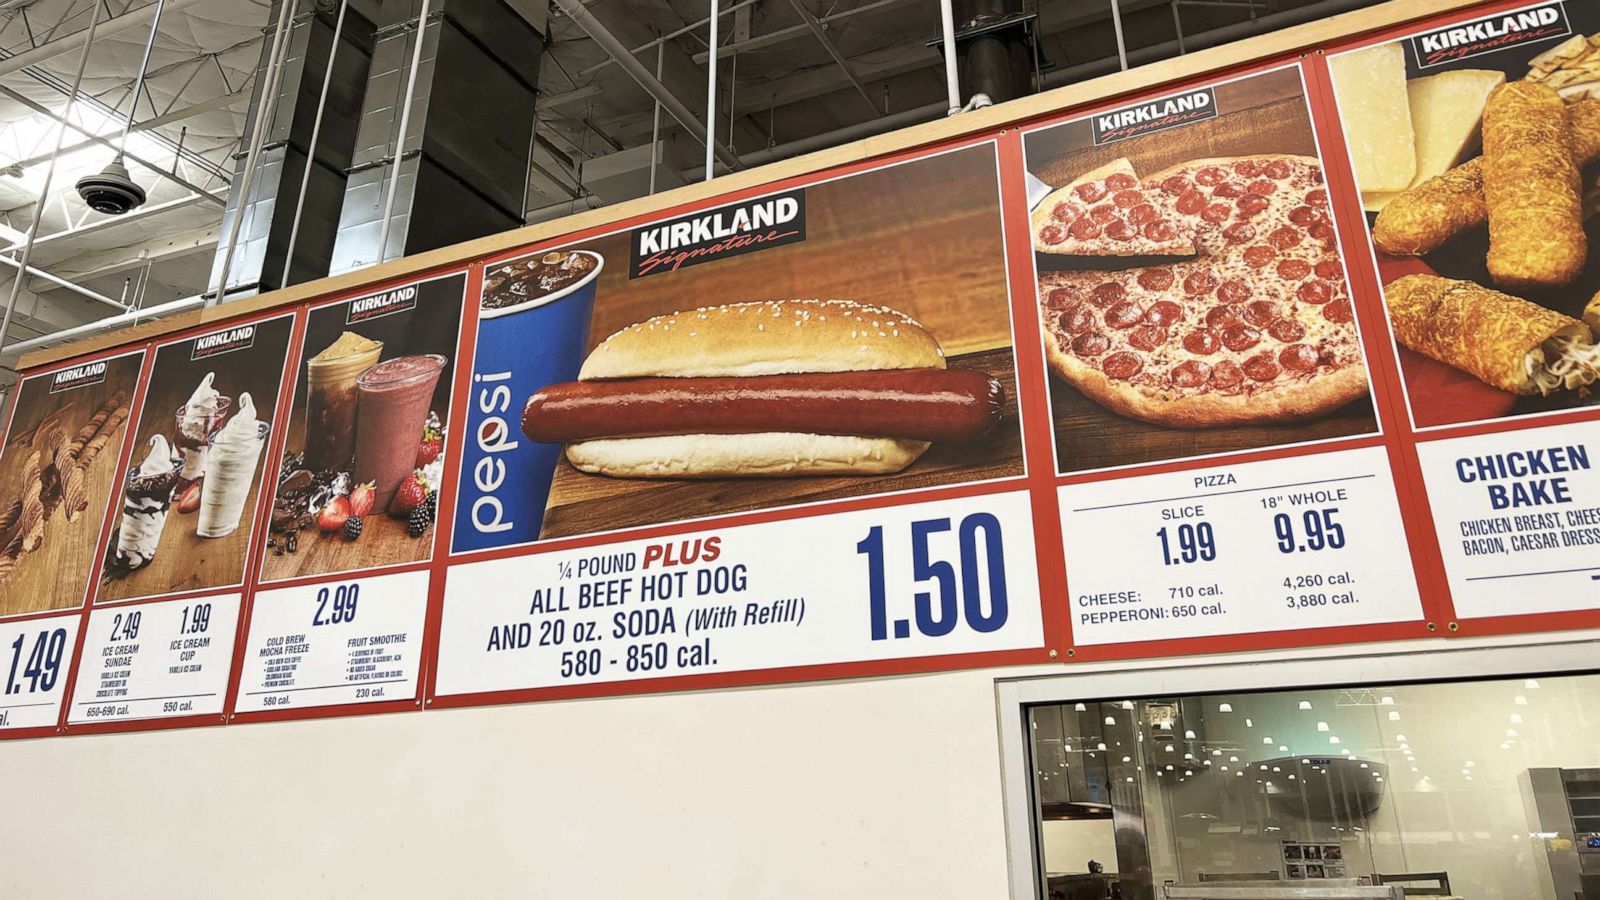 Costco's $1.50 hot dog combo is now an official Monopoly game piece